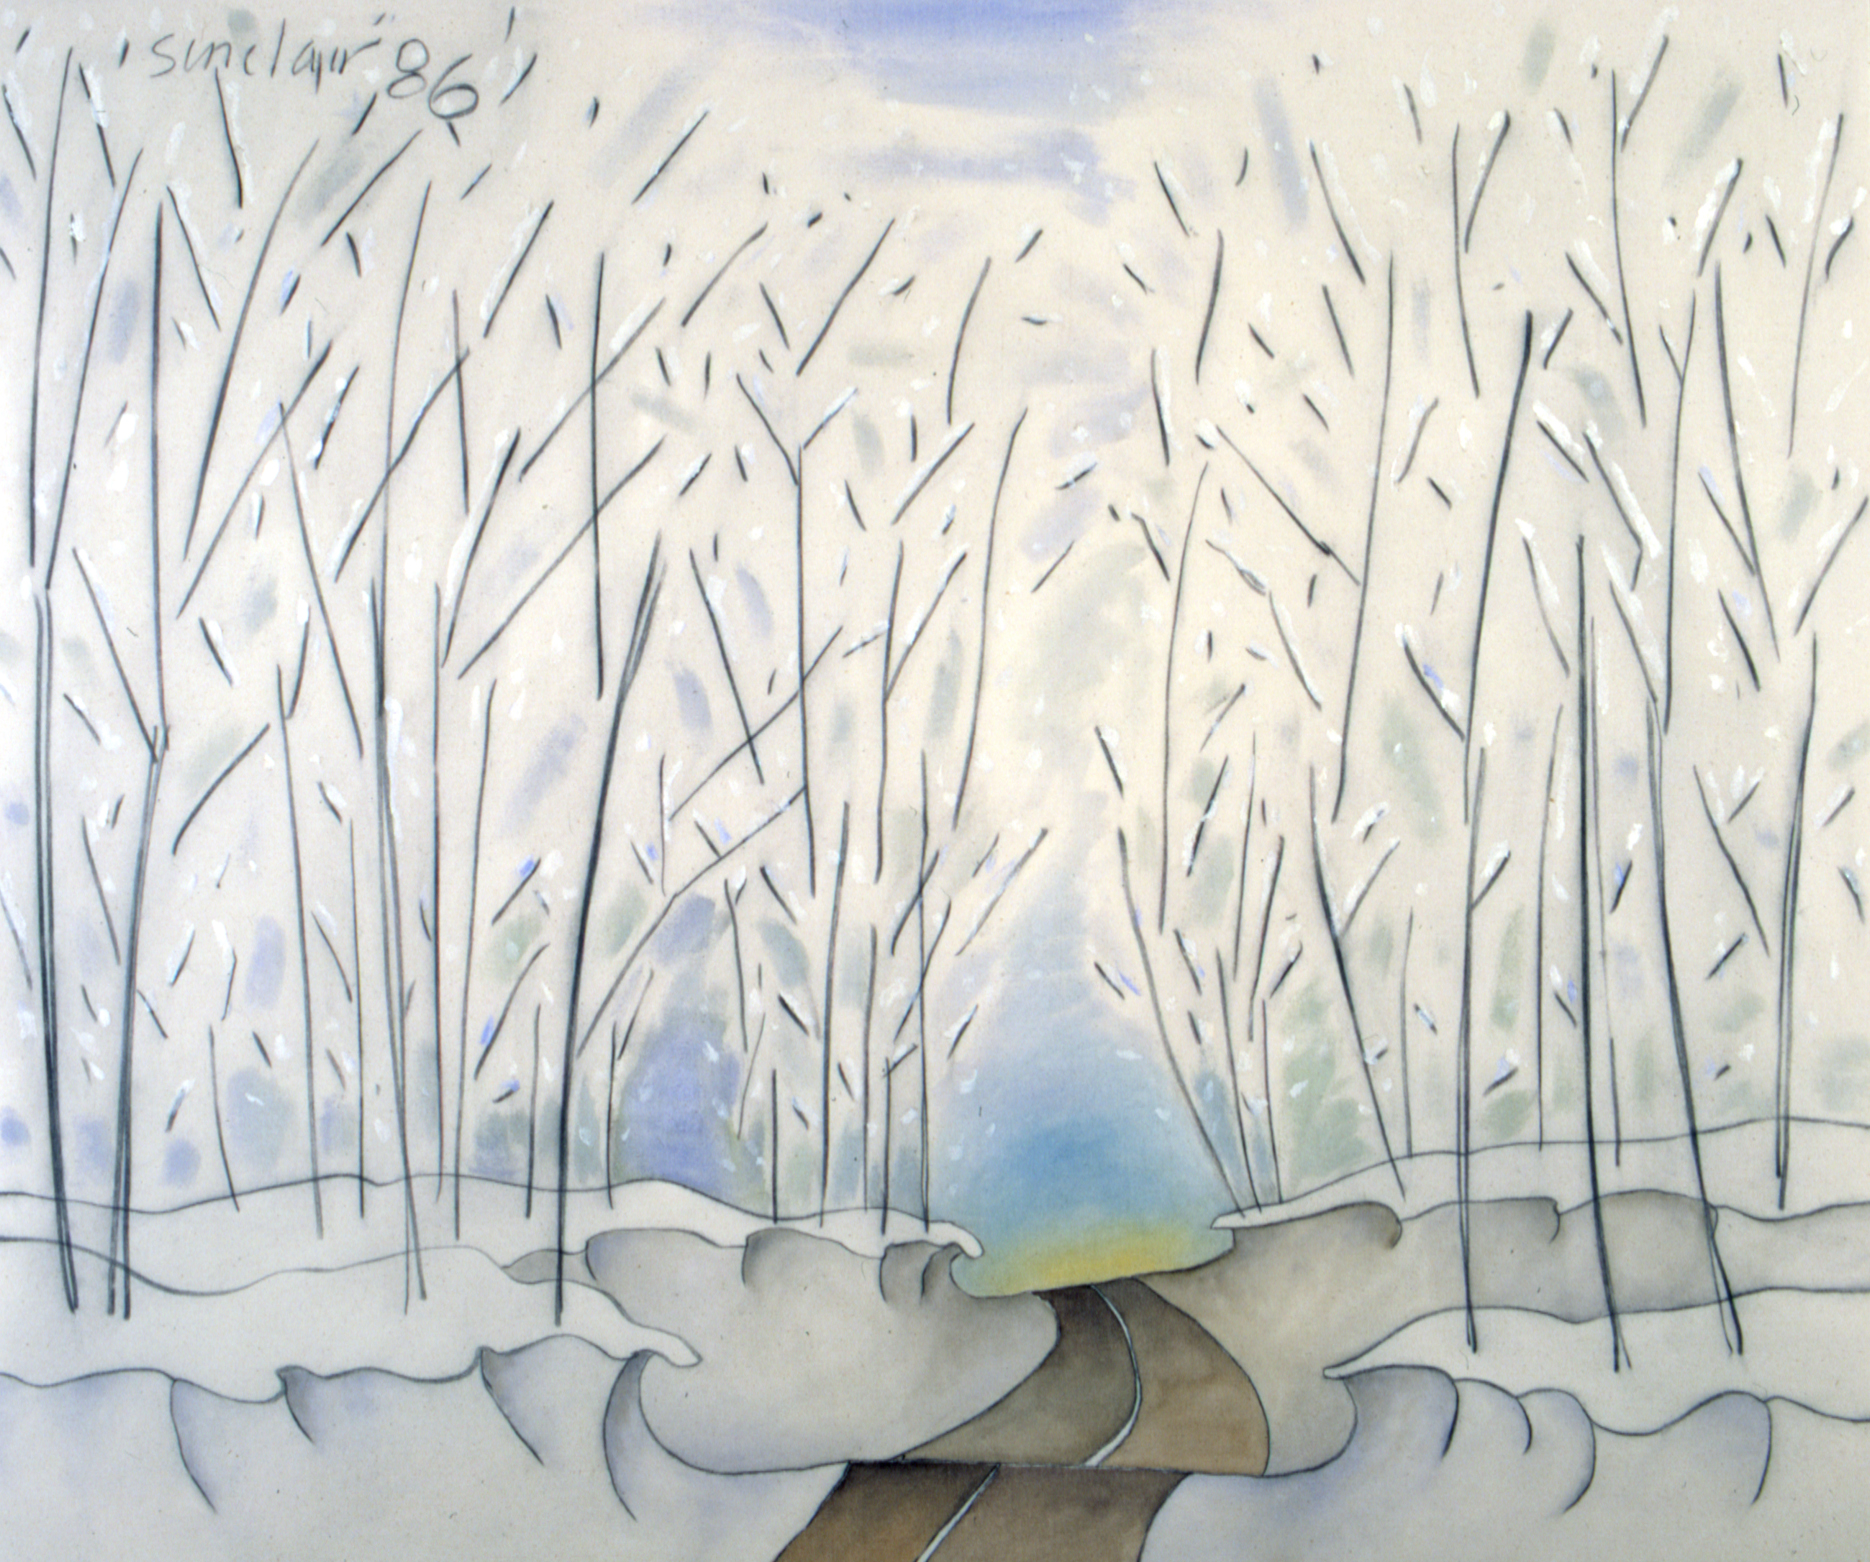 A painting of an empty road through a forest and the banks of snow on each side